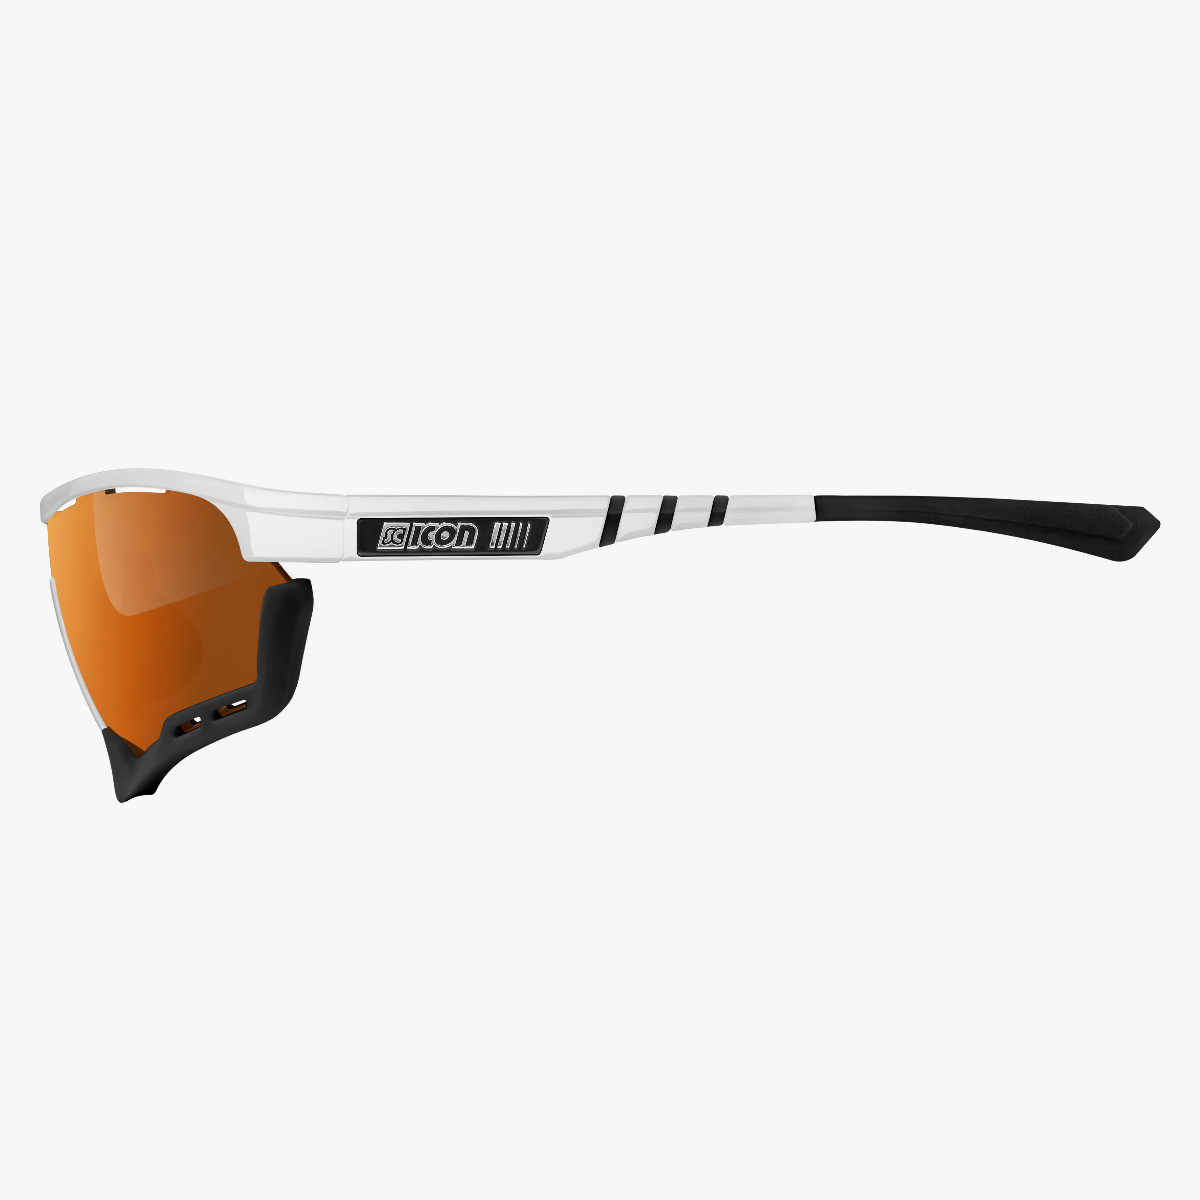 Scicon Sports | Aerotech Sport Cycling Performance Sunglasses - White / Bronze - EY13070401
